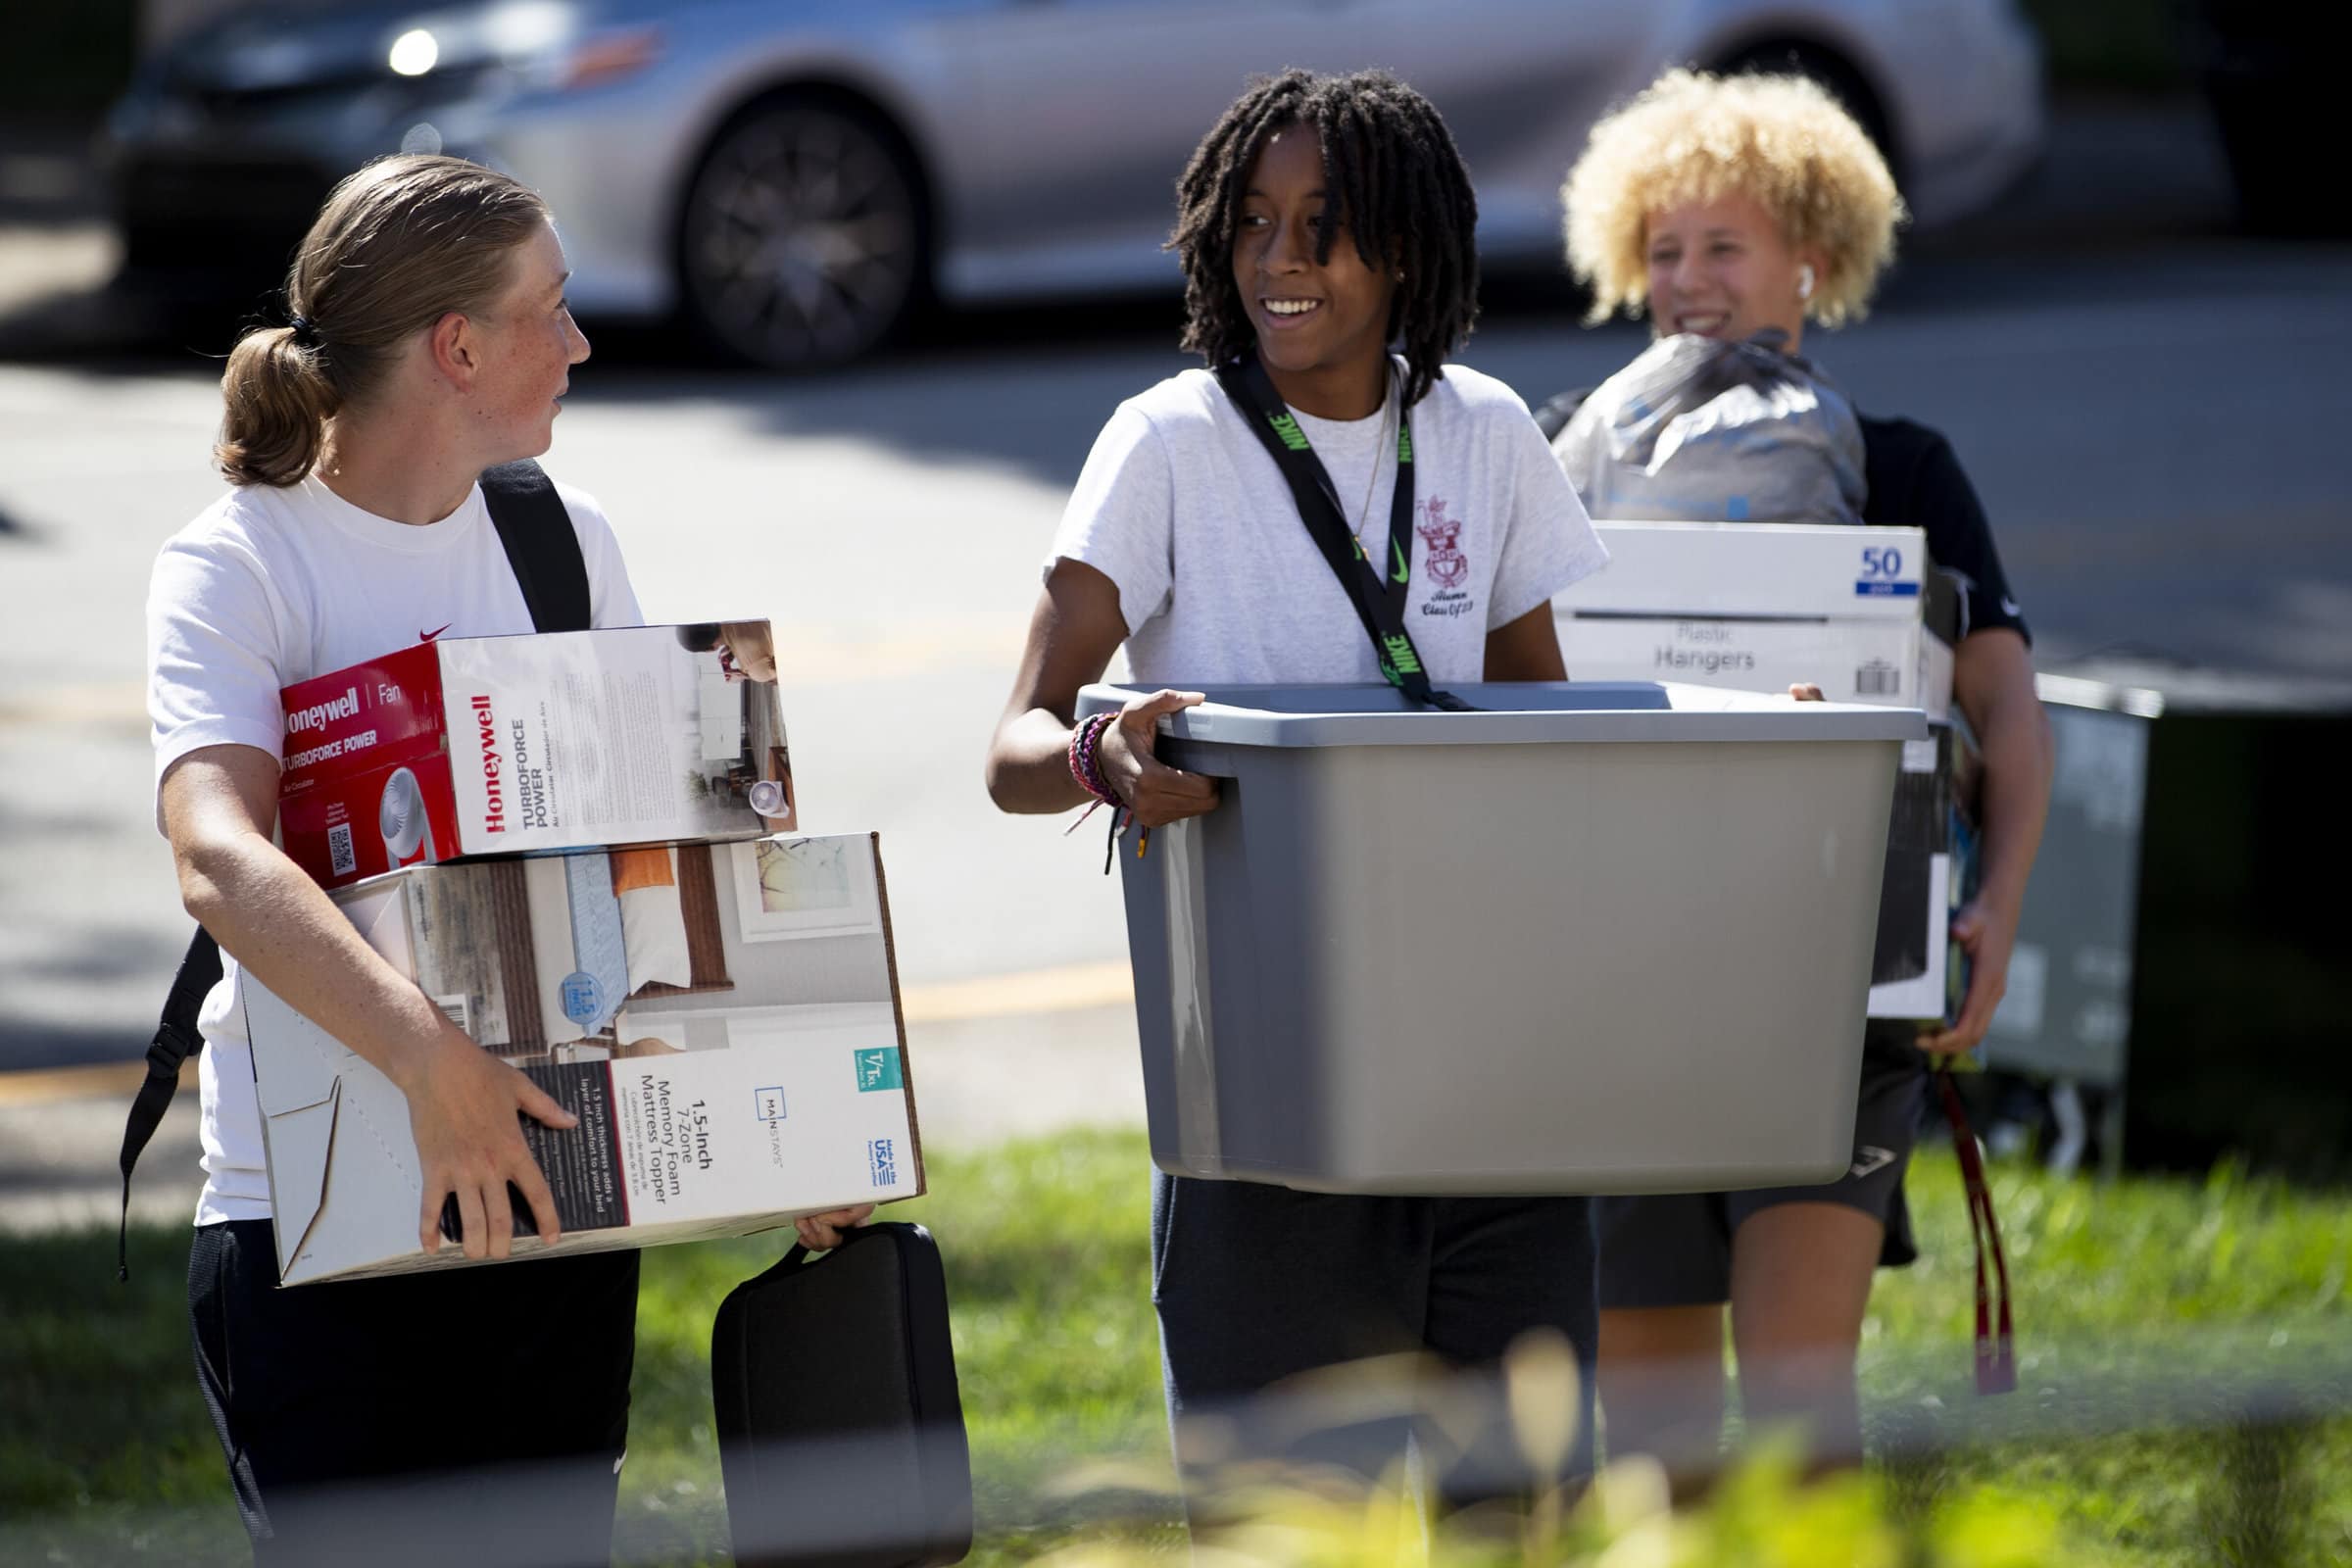 Students moving in carrying boxes and bins.